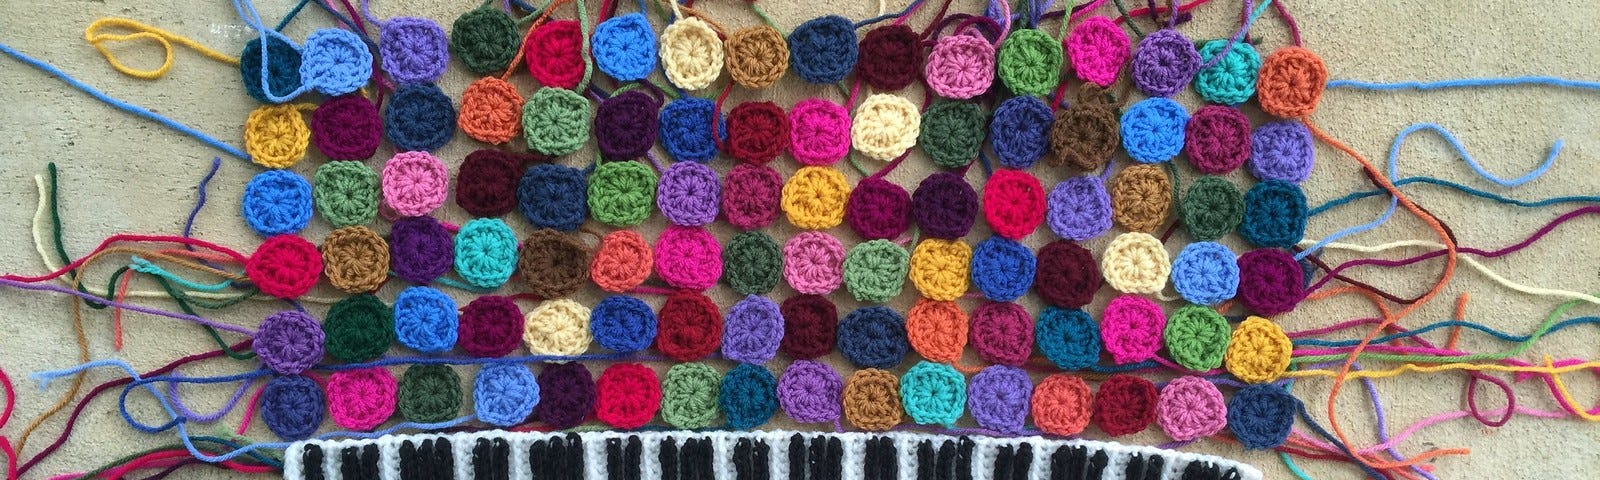 A crochet keyboard and more than one hundred one-round granny squares